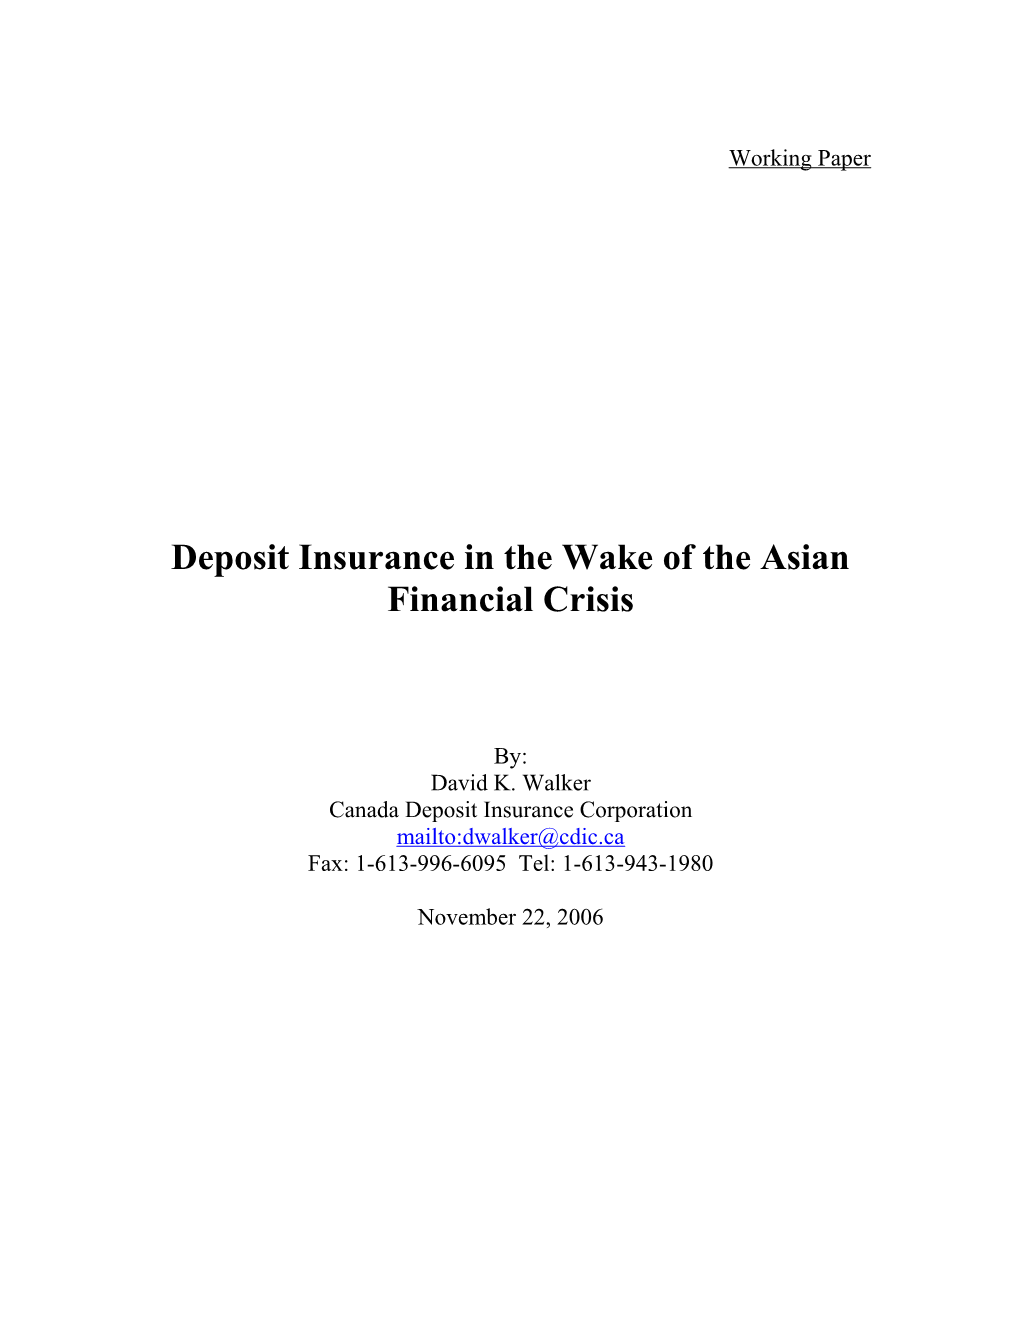 Deposit Insurance in the Wake of the Asian Financial Crisis